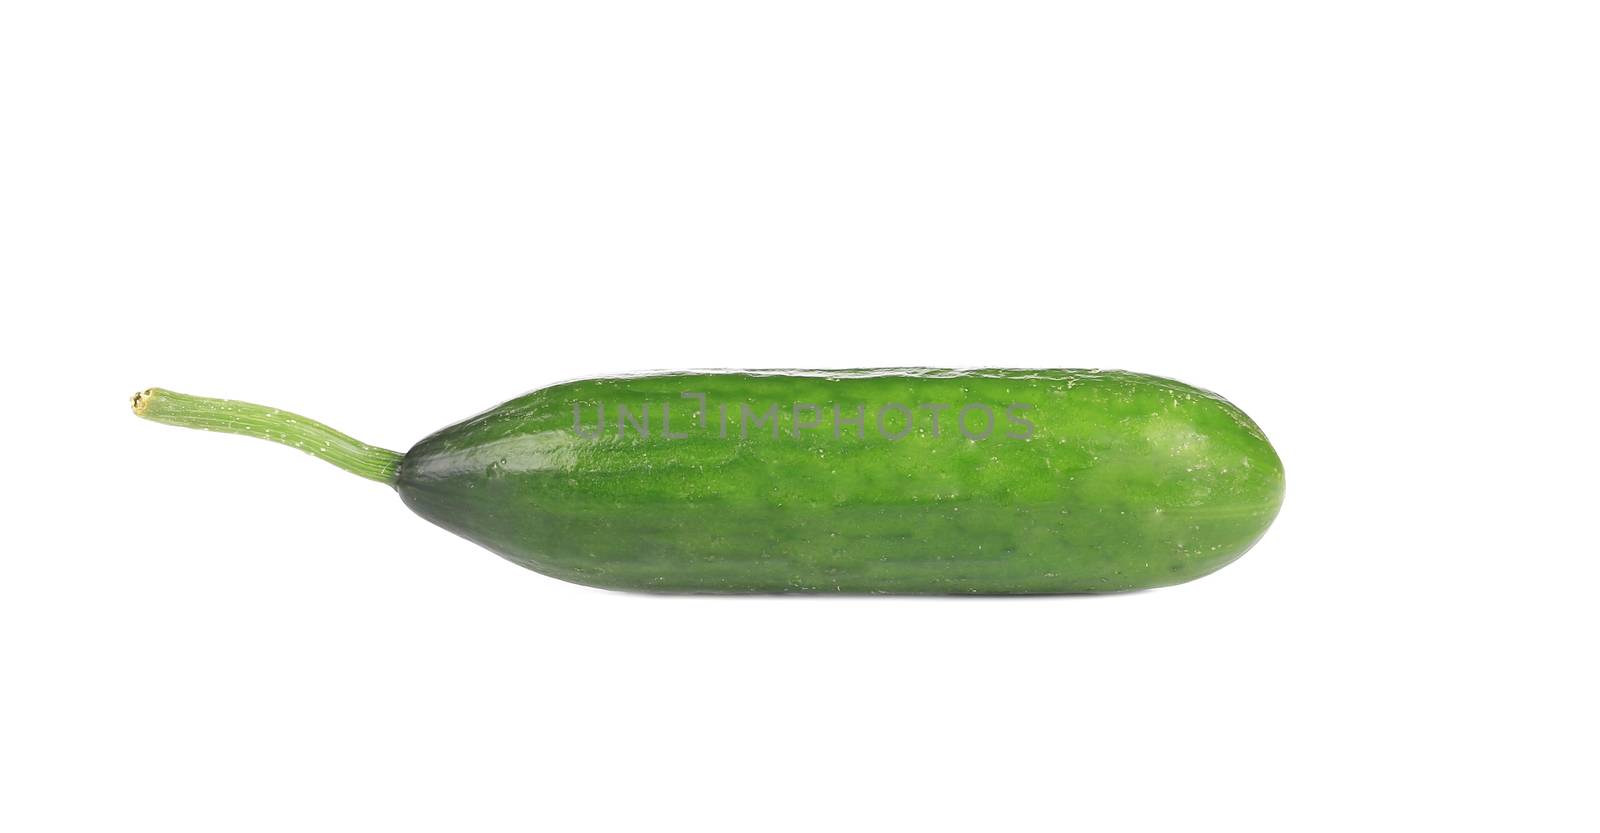 Fresh cucumber. Isolated on a white background.